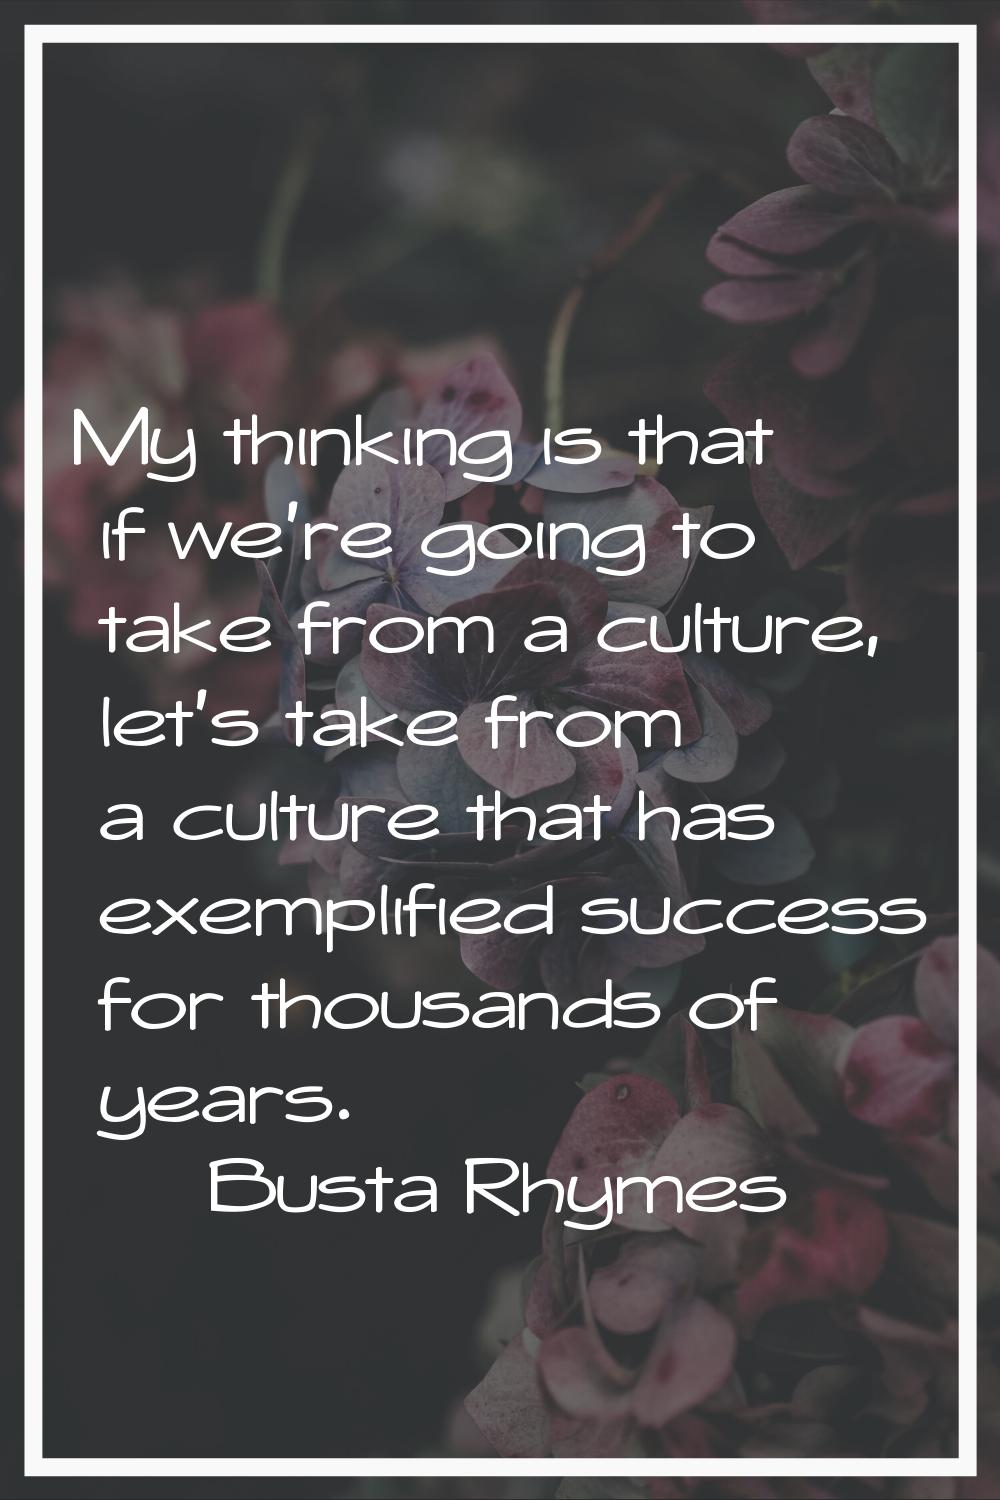 My thinking is that if we're going to take from a culture, let's take from a culture that has exemp